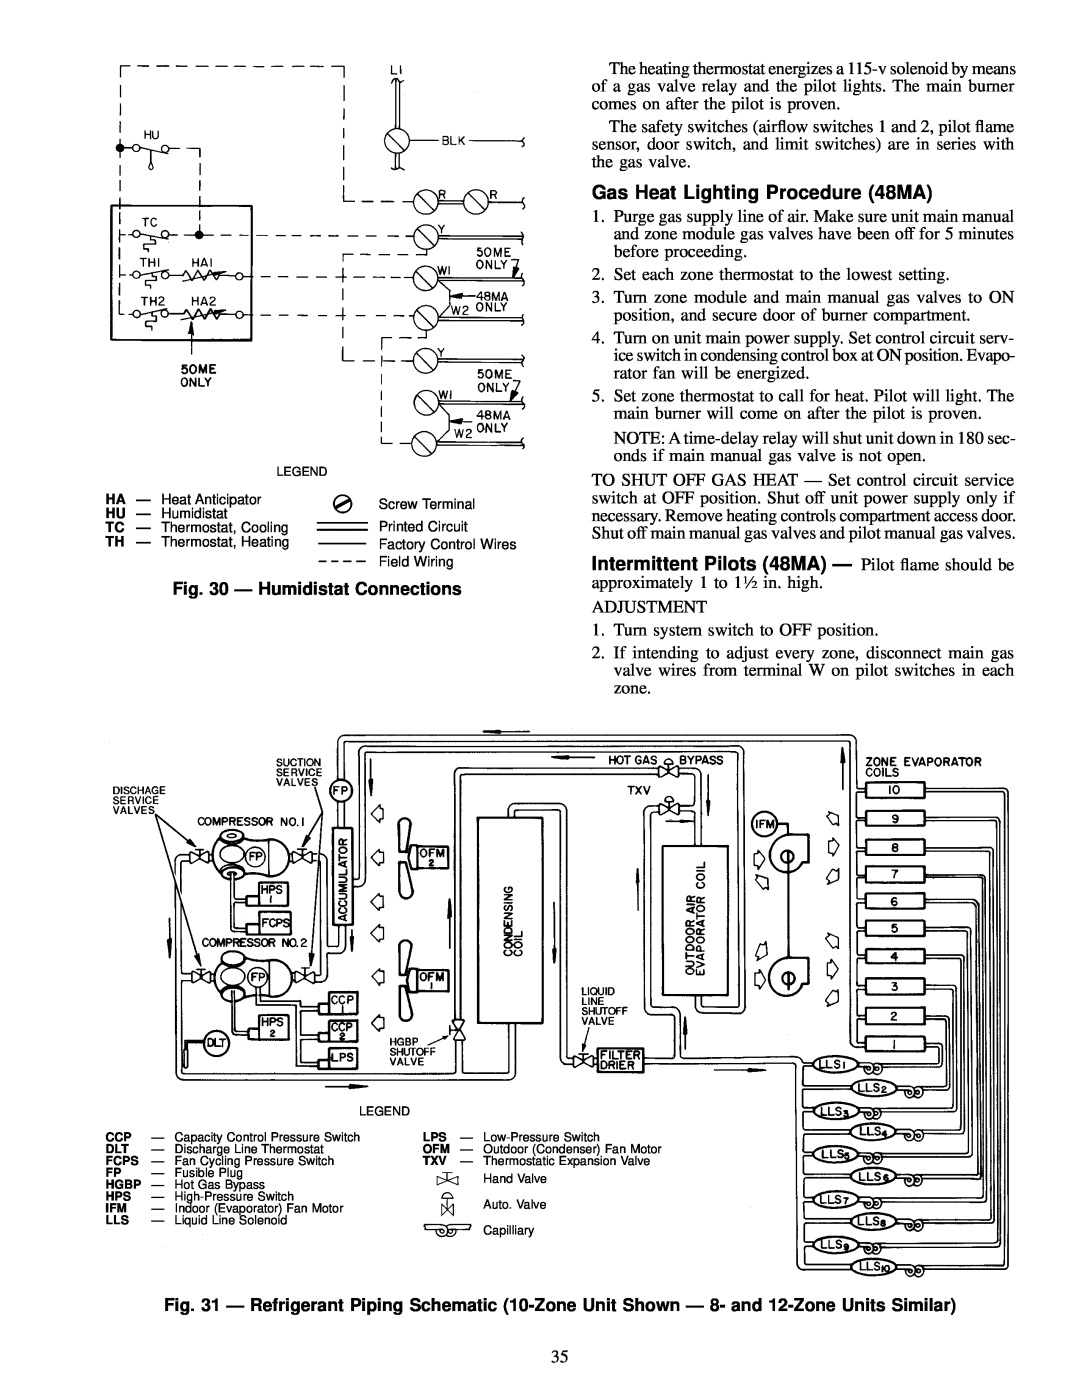 Carrier 48MA/50ME016-040 specifications Gas Heat Lighting Procedure 48MA, Ð Humidistat Connections 